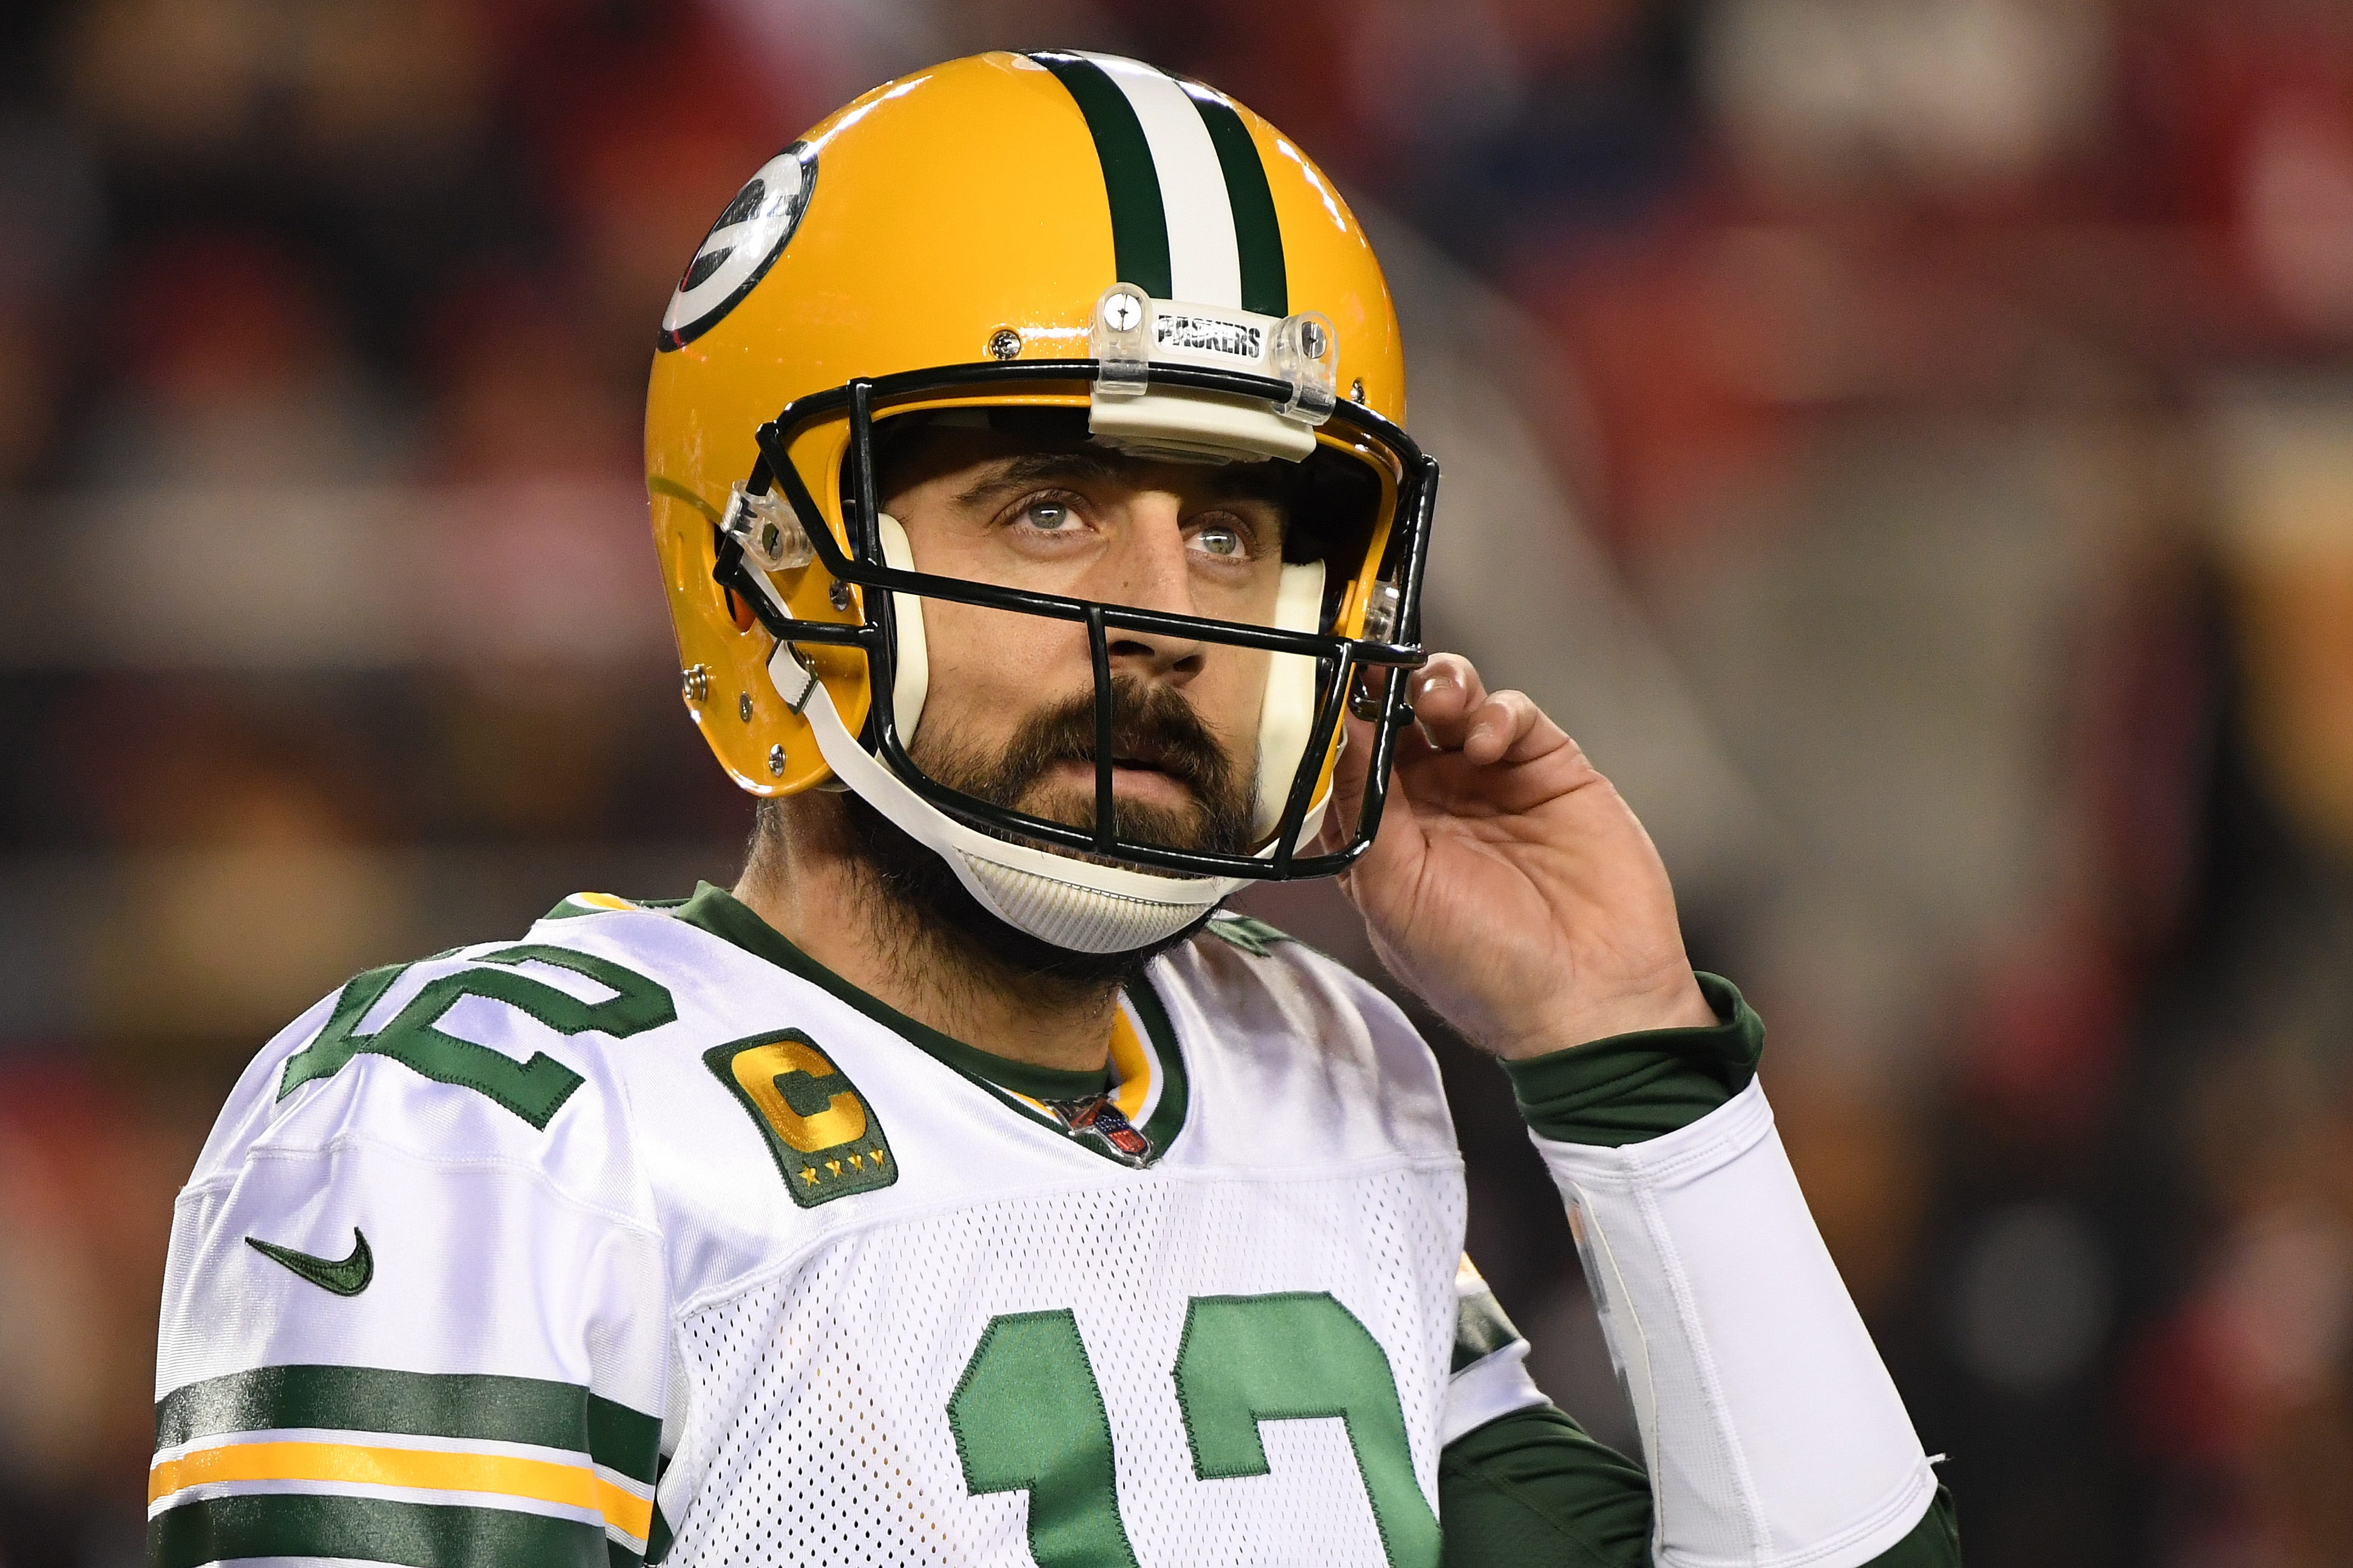 Opinion: Aaron Rodgers' fractured relationship with Packers leaves slimmest of hope for repair